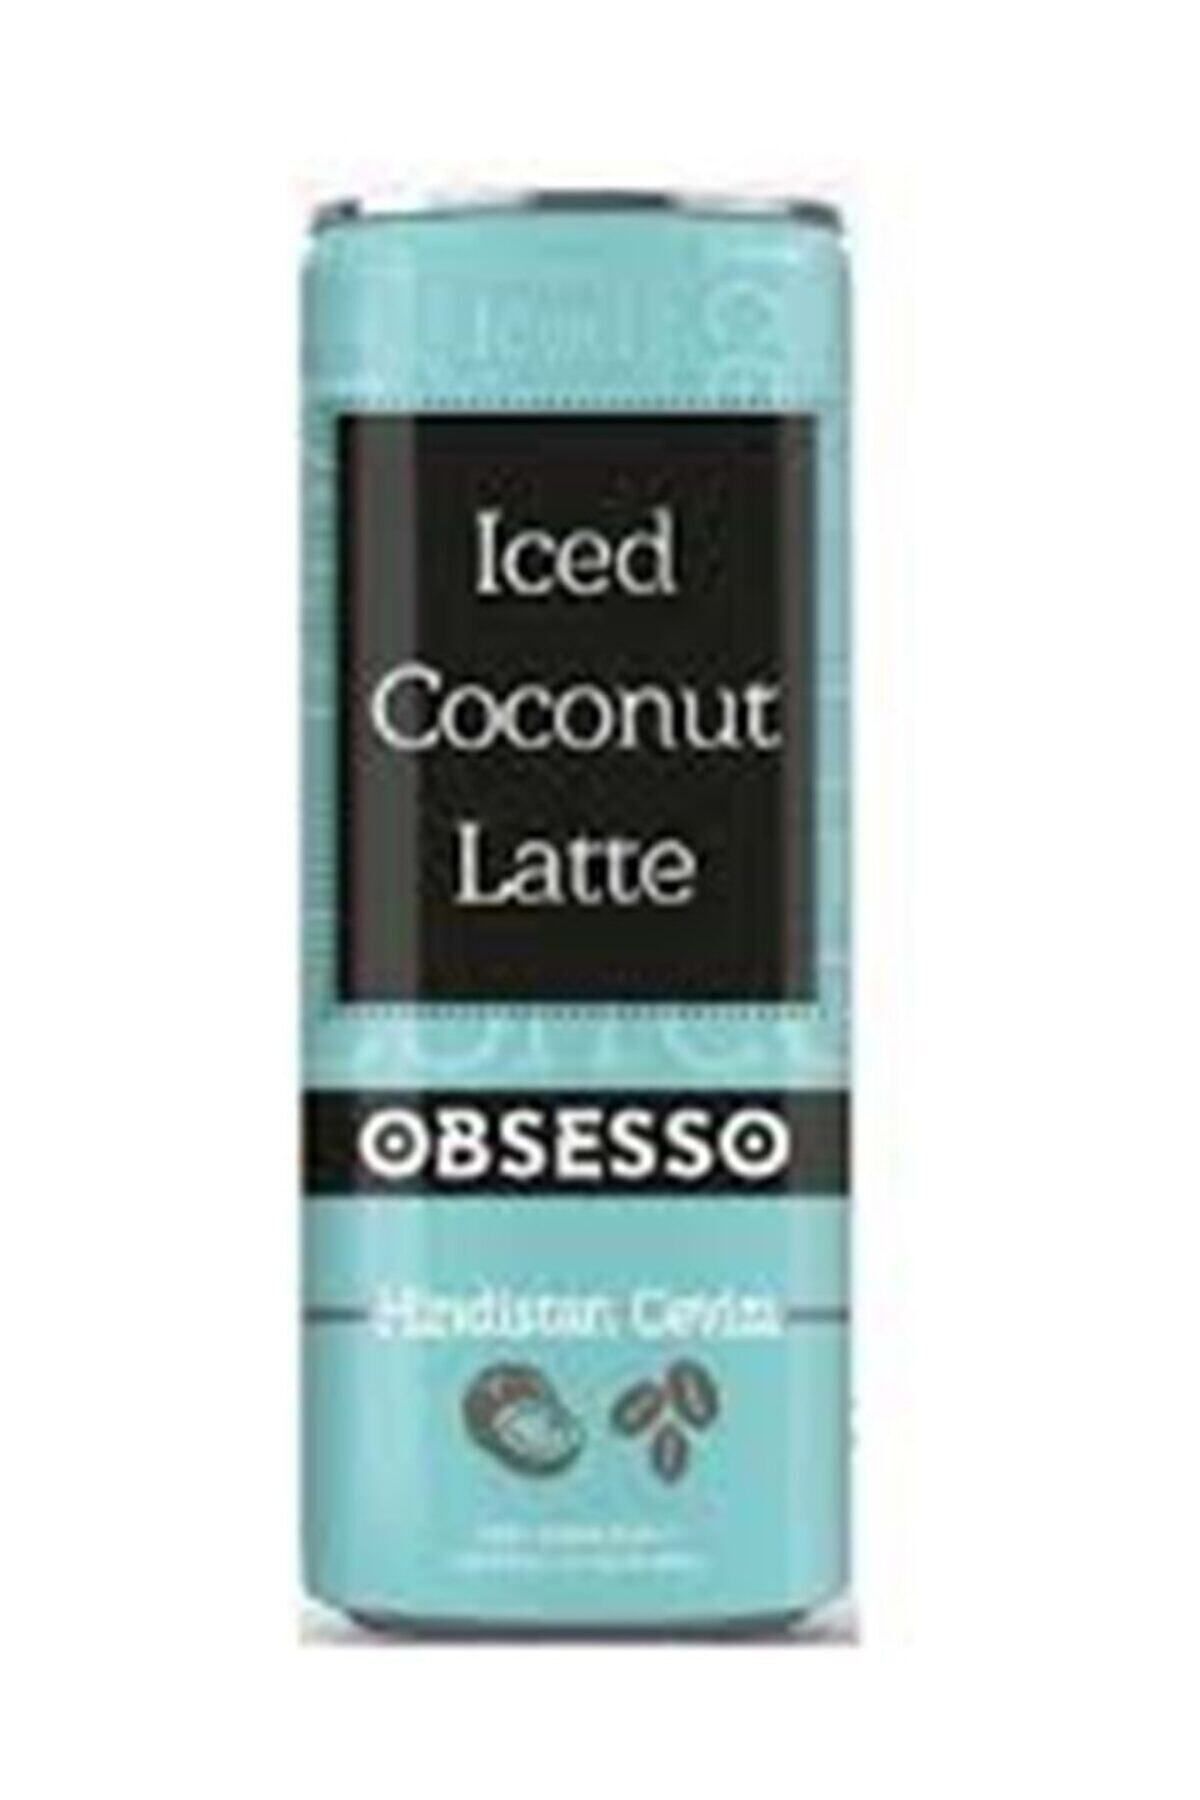 OBSESSO Iced Coconut Latte 250 ml